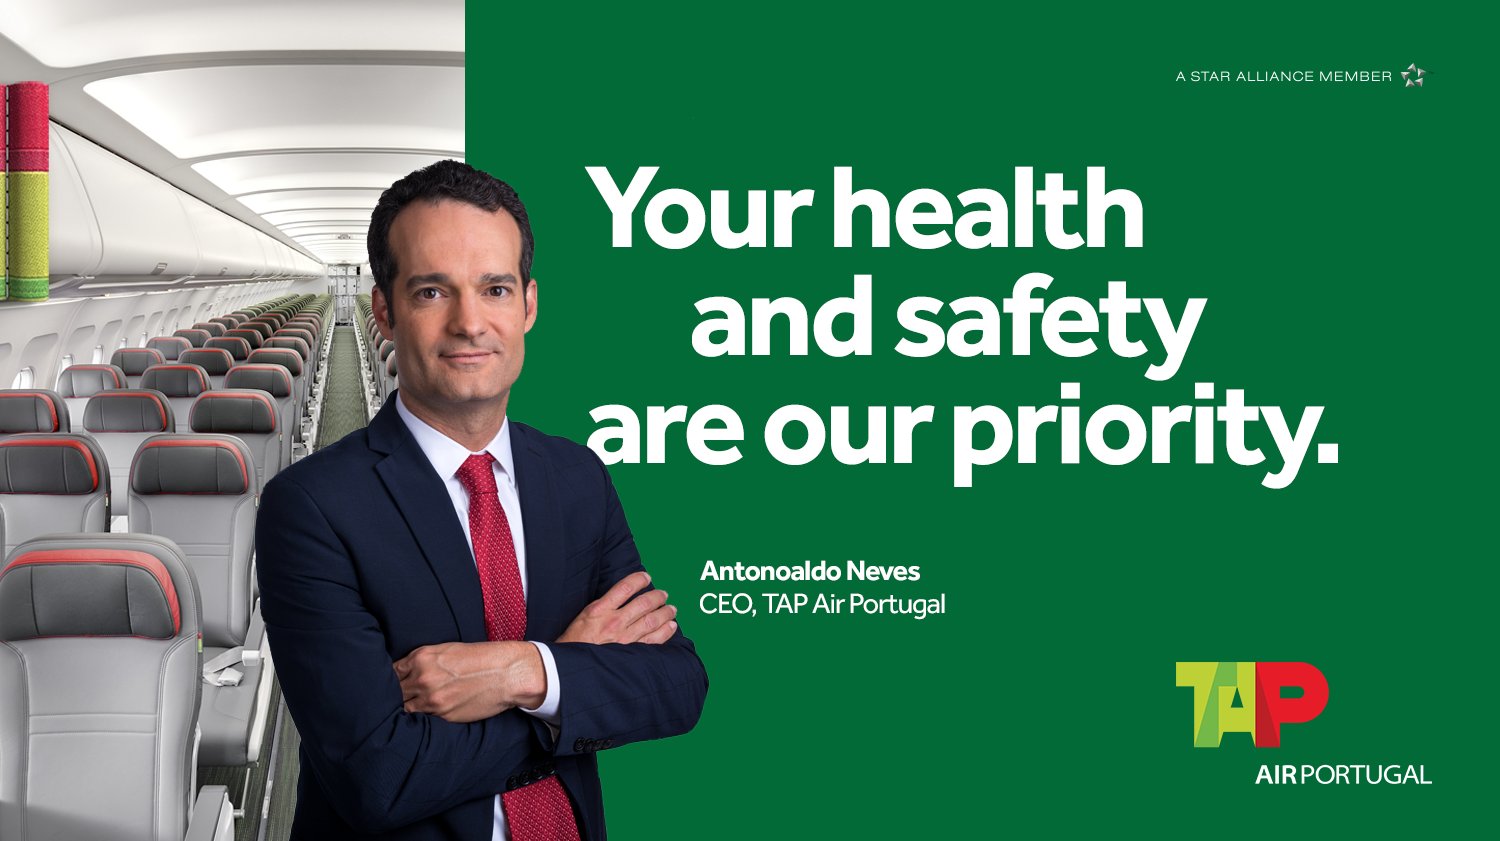 TAP Air Portugal on Twitter: "Since the beginning of the COVID-19 outbreak,  TAP has been taking measures to ensure the health and safety of all people.  Find out how we ensure you